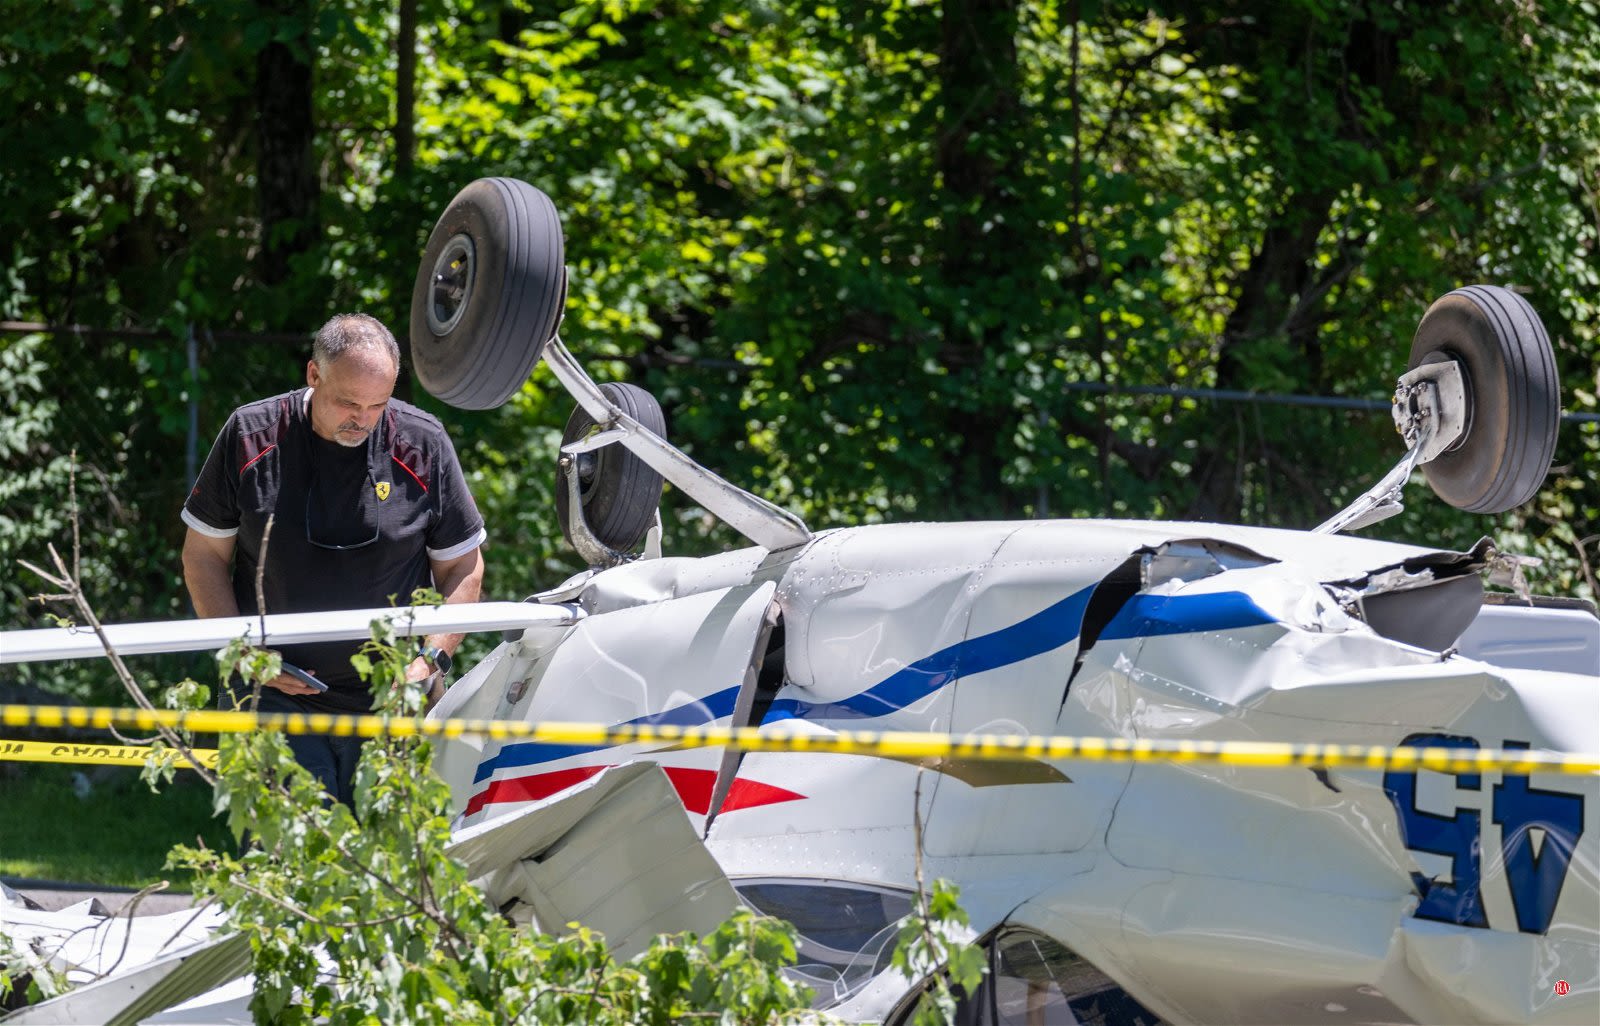 Student pilot was attempting solo cross-country flight before crash